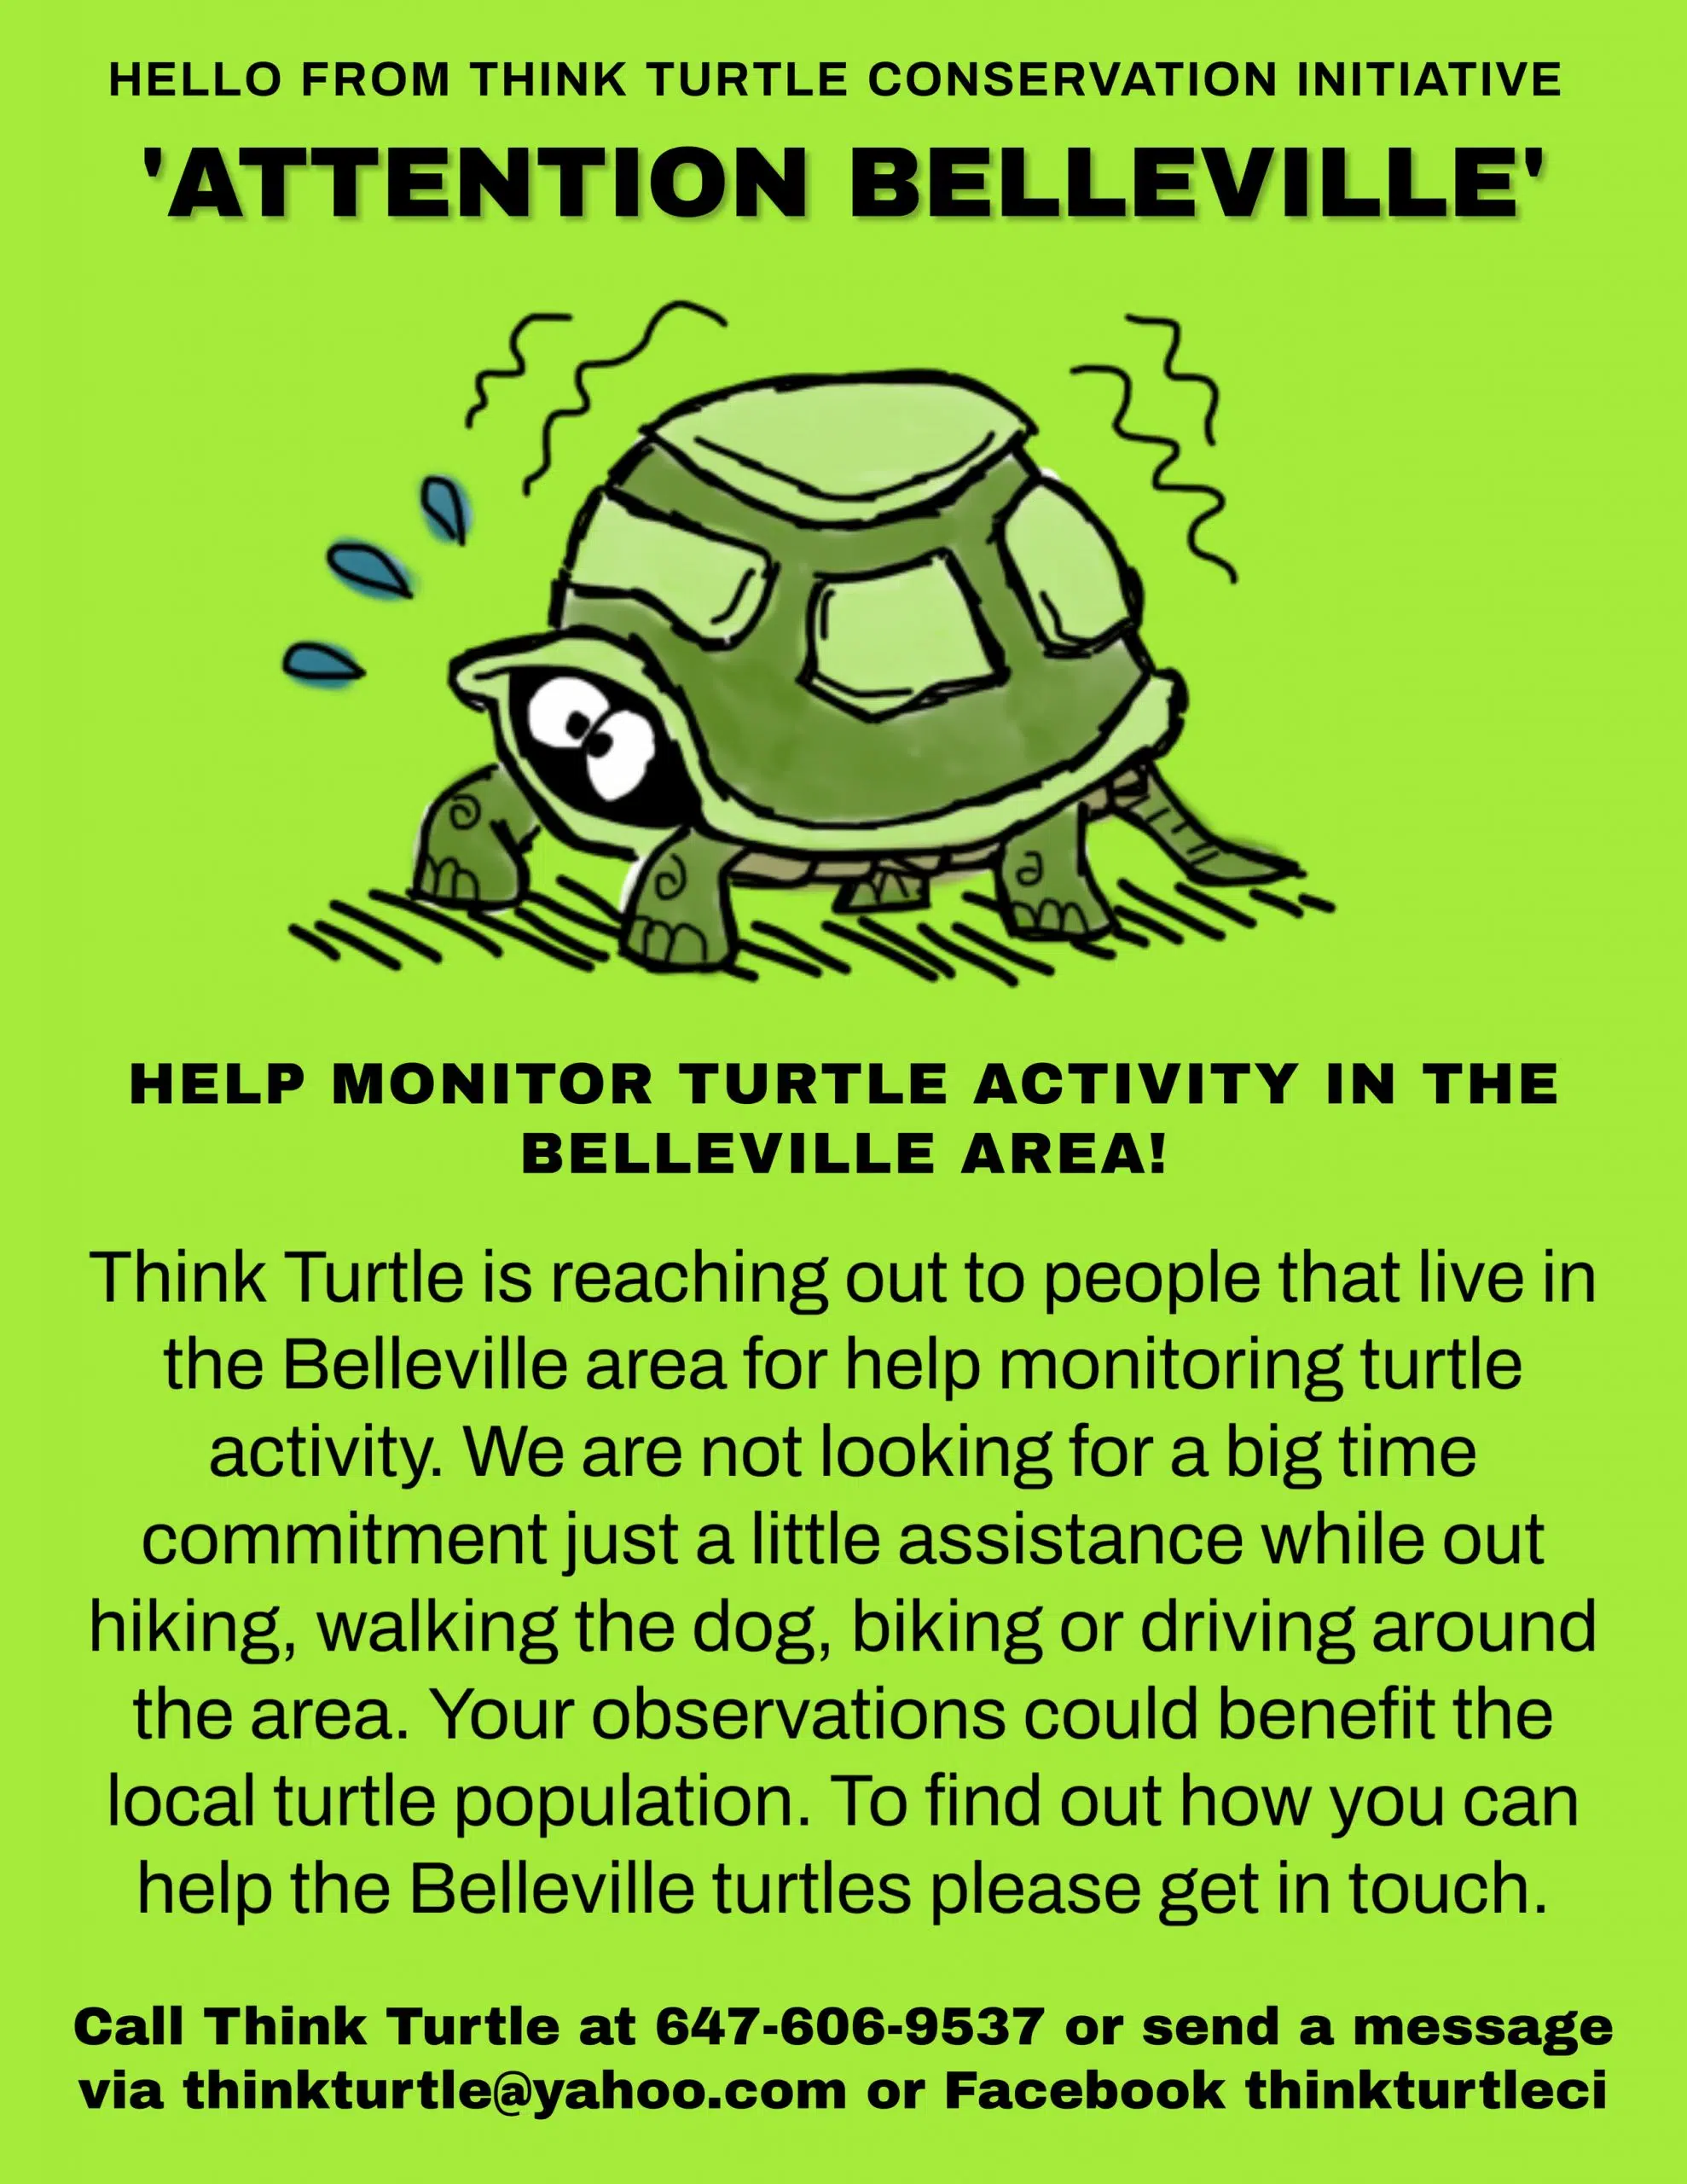 RELEASE: Turtle monitors wanted